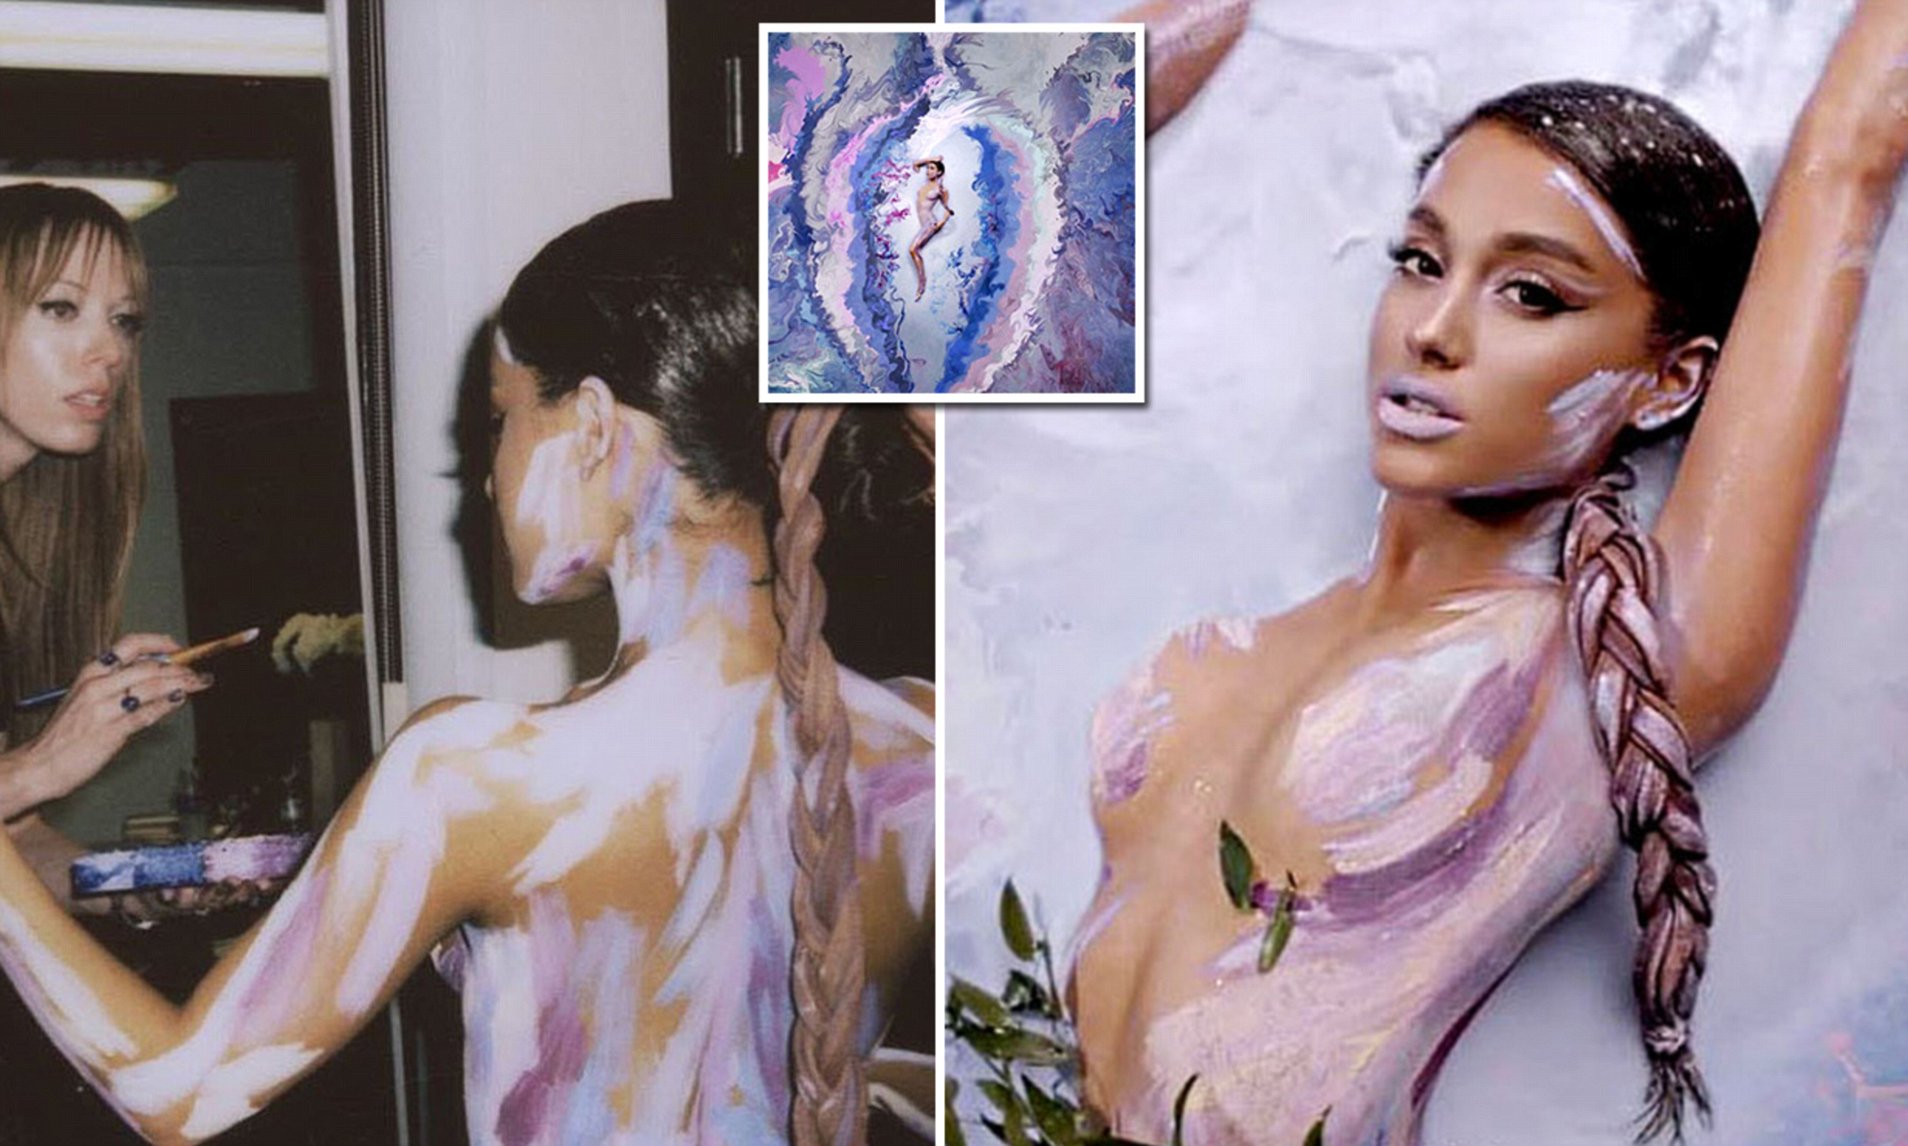 diangelo washington recommends ariana grande sleeping naked pic